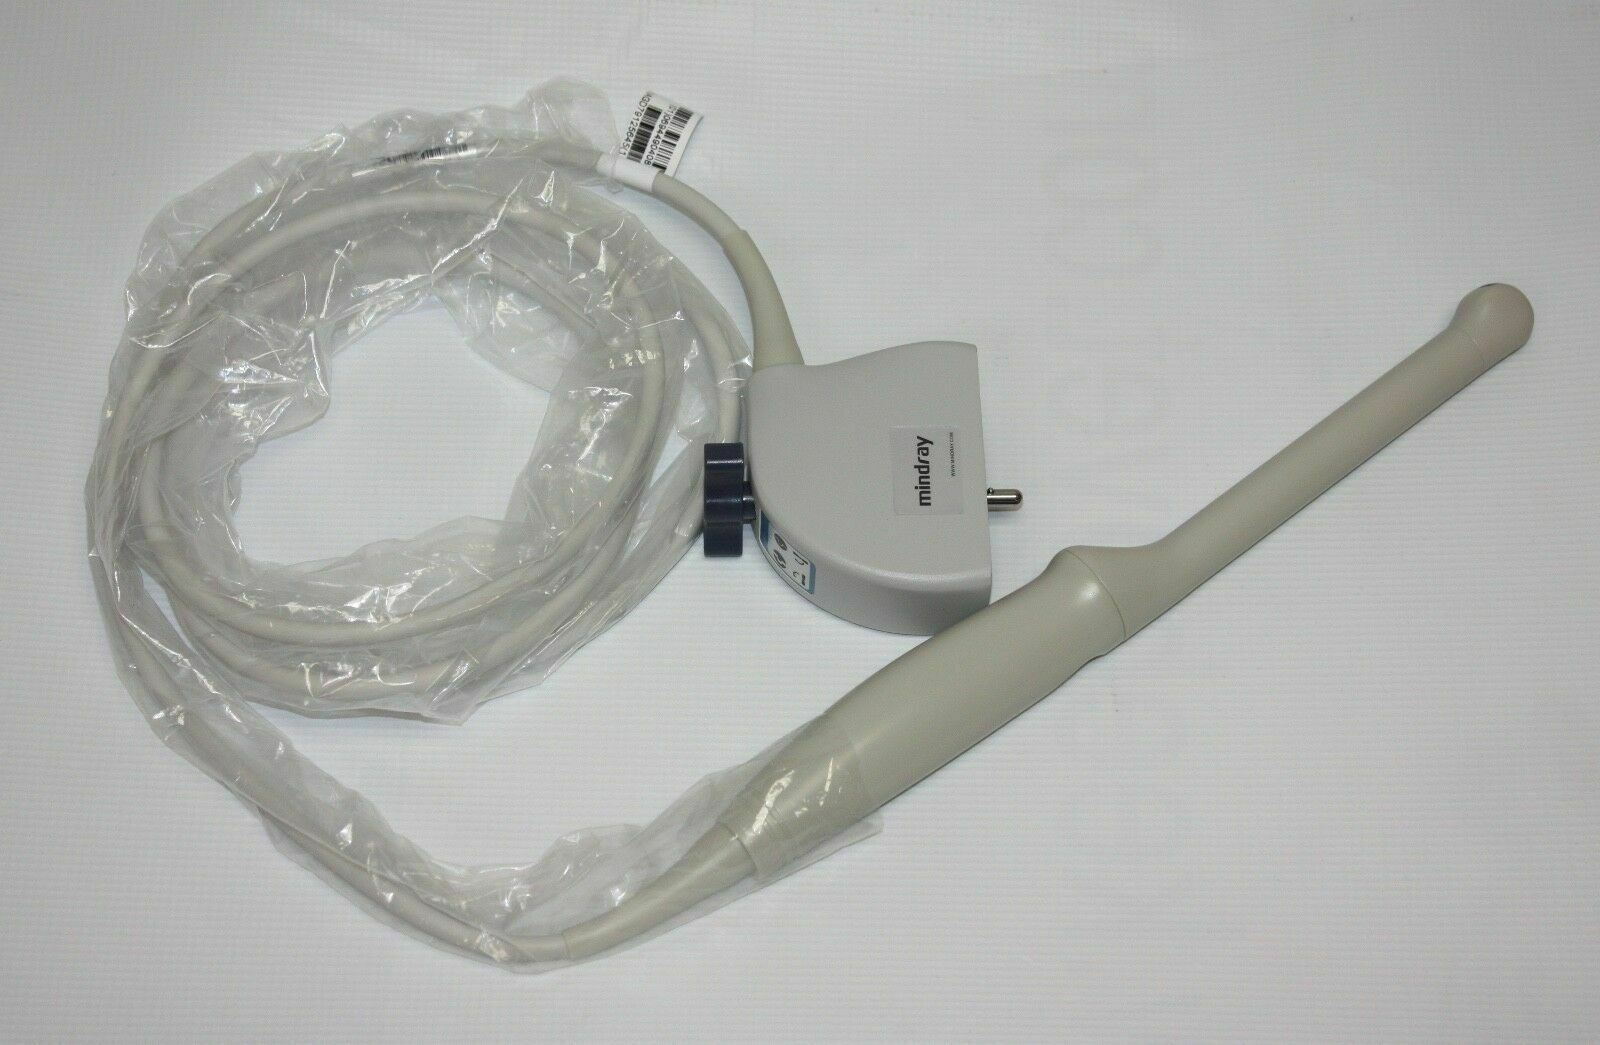 Genuine Mindray 65EC10EA Endo-Cavity OBGYN Transducer Probe, FOR DP Ultrasounds DIAGNOSTIC ULTRASOUND MACHINES FOR SALE